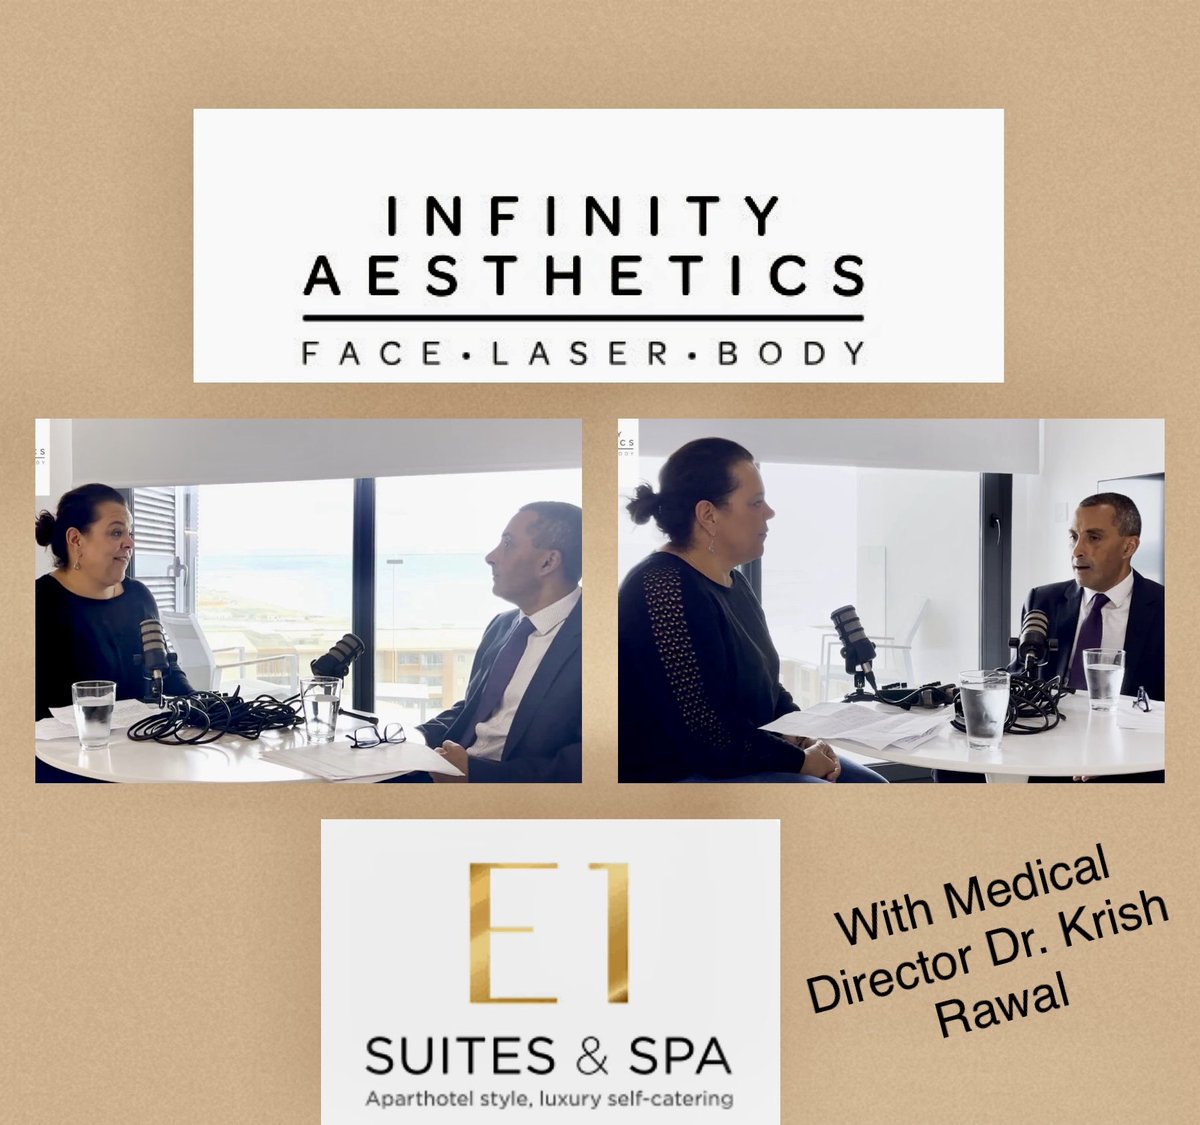 🎥 youtu.be/_hVI95ZaW5Q. Watch or listen 🎙️ shows.acast.com/on-the-sofa-wi… as Dr Krish Rawal Medical Director at @InfinityGroupGi tells me how you can live longer, better. Join us #onthesofawithrouge. #podcast #HealthAndWellness #livingyourbestlife #visitgibraltar